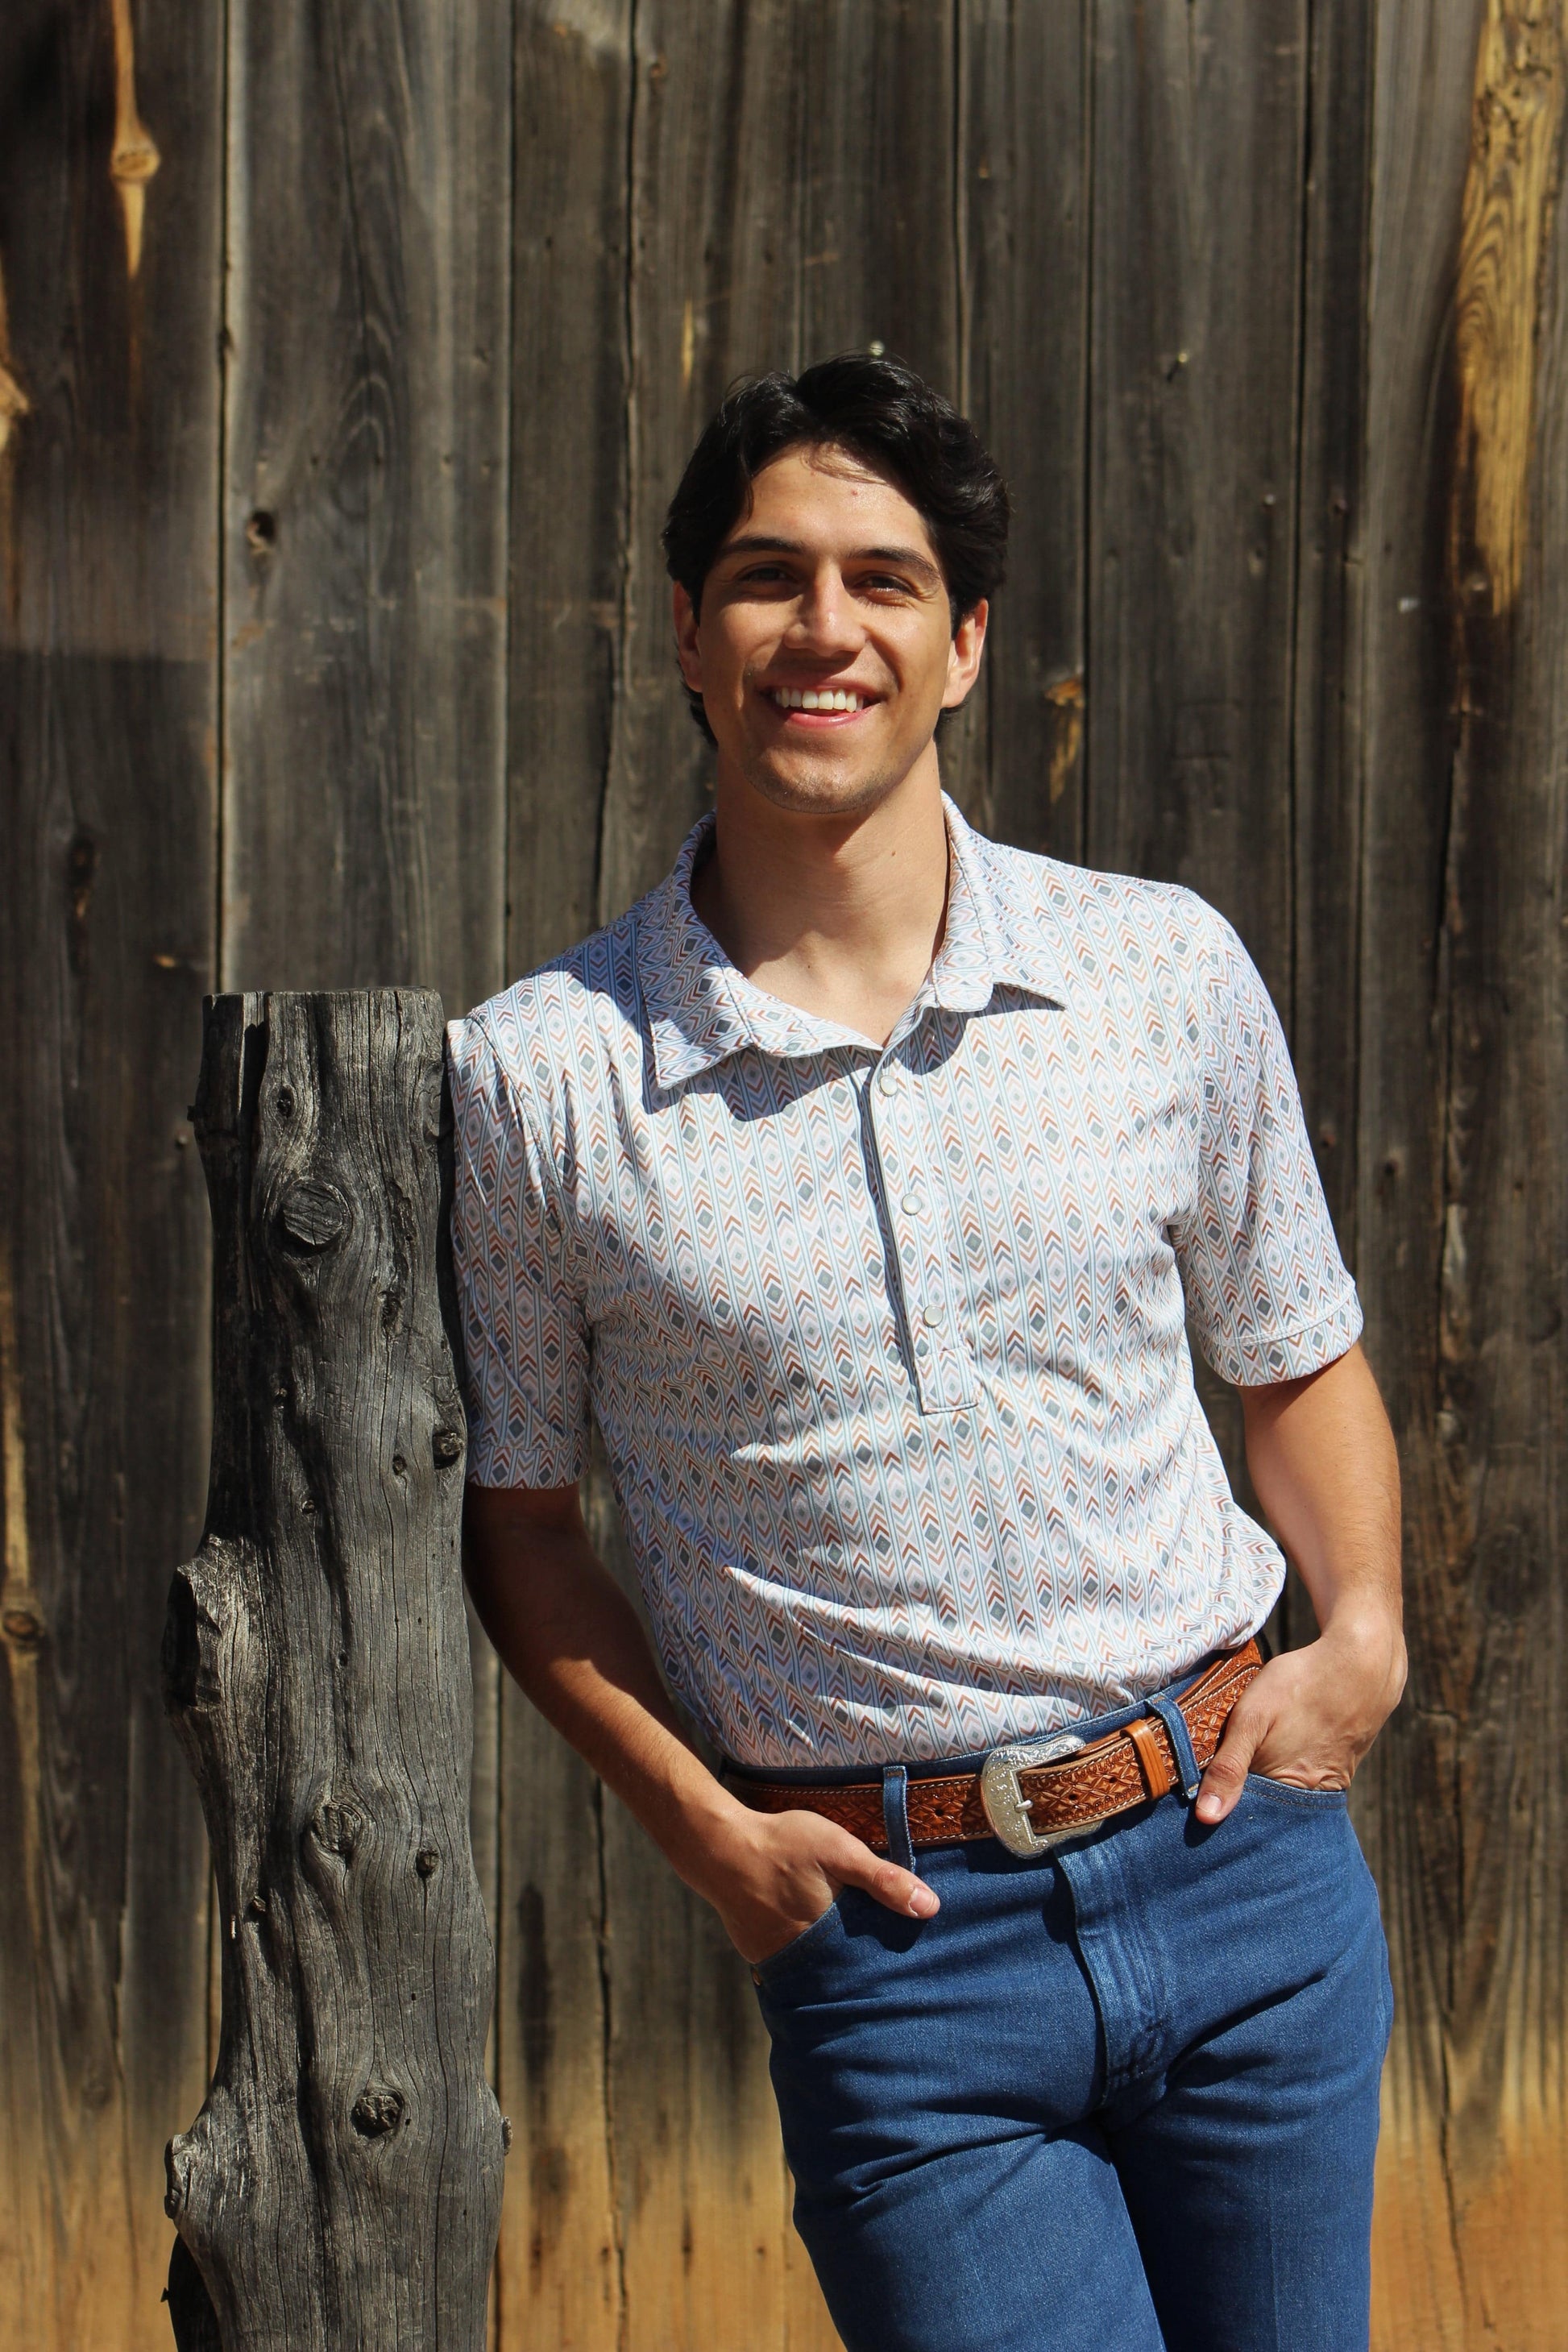 A happy young man poses confidently in HowdyHo's Aztec Fusion short-sleeved shirt, paired with blue jeans and a brown leather belt. The shirt's unique geometric print in soft hues complements the rustic wooden backdrop, capturing the essence of a casual, modern style.